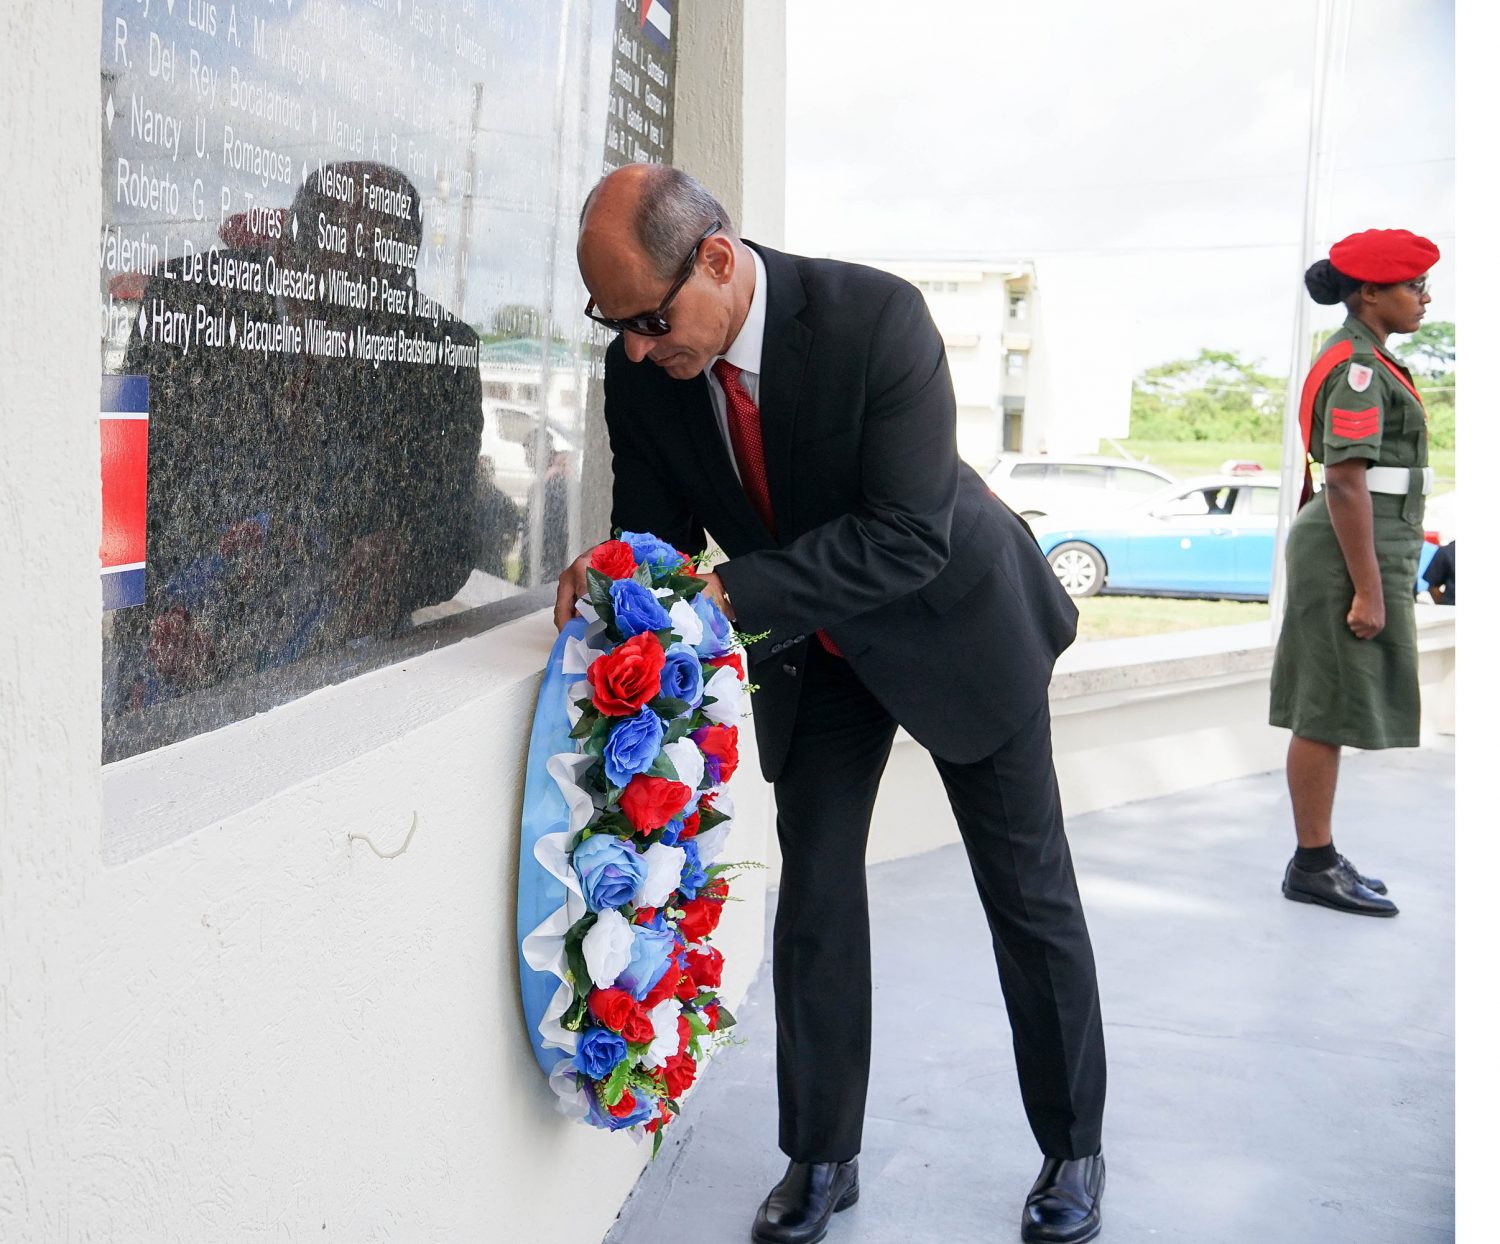  Cuba’s Vice Minister of Foreign Affairs Rogelio Sierra Diaz laying a wreath at the Monument to the Victims of Terrorism at the University of Guyana’s Turkeyen campus (Ministry of the Presidency photo)